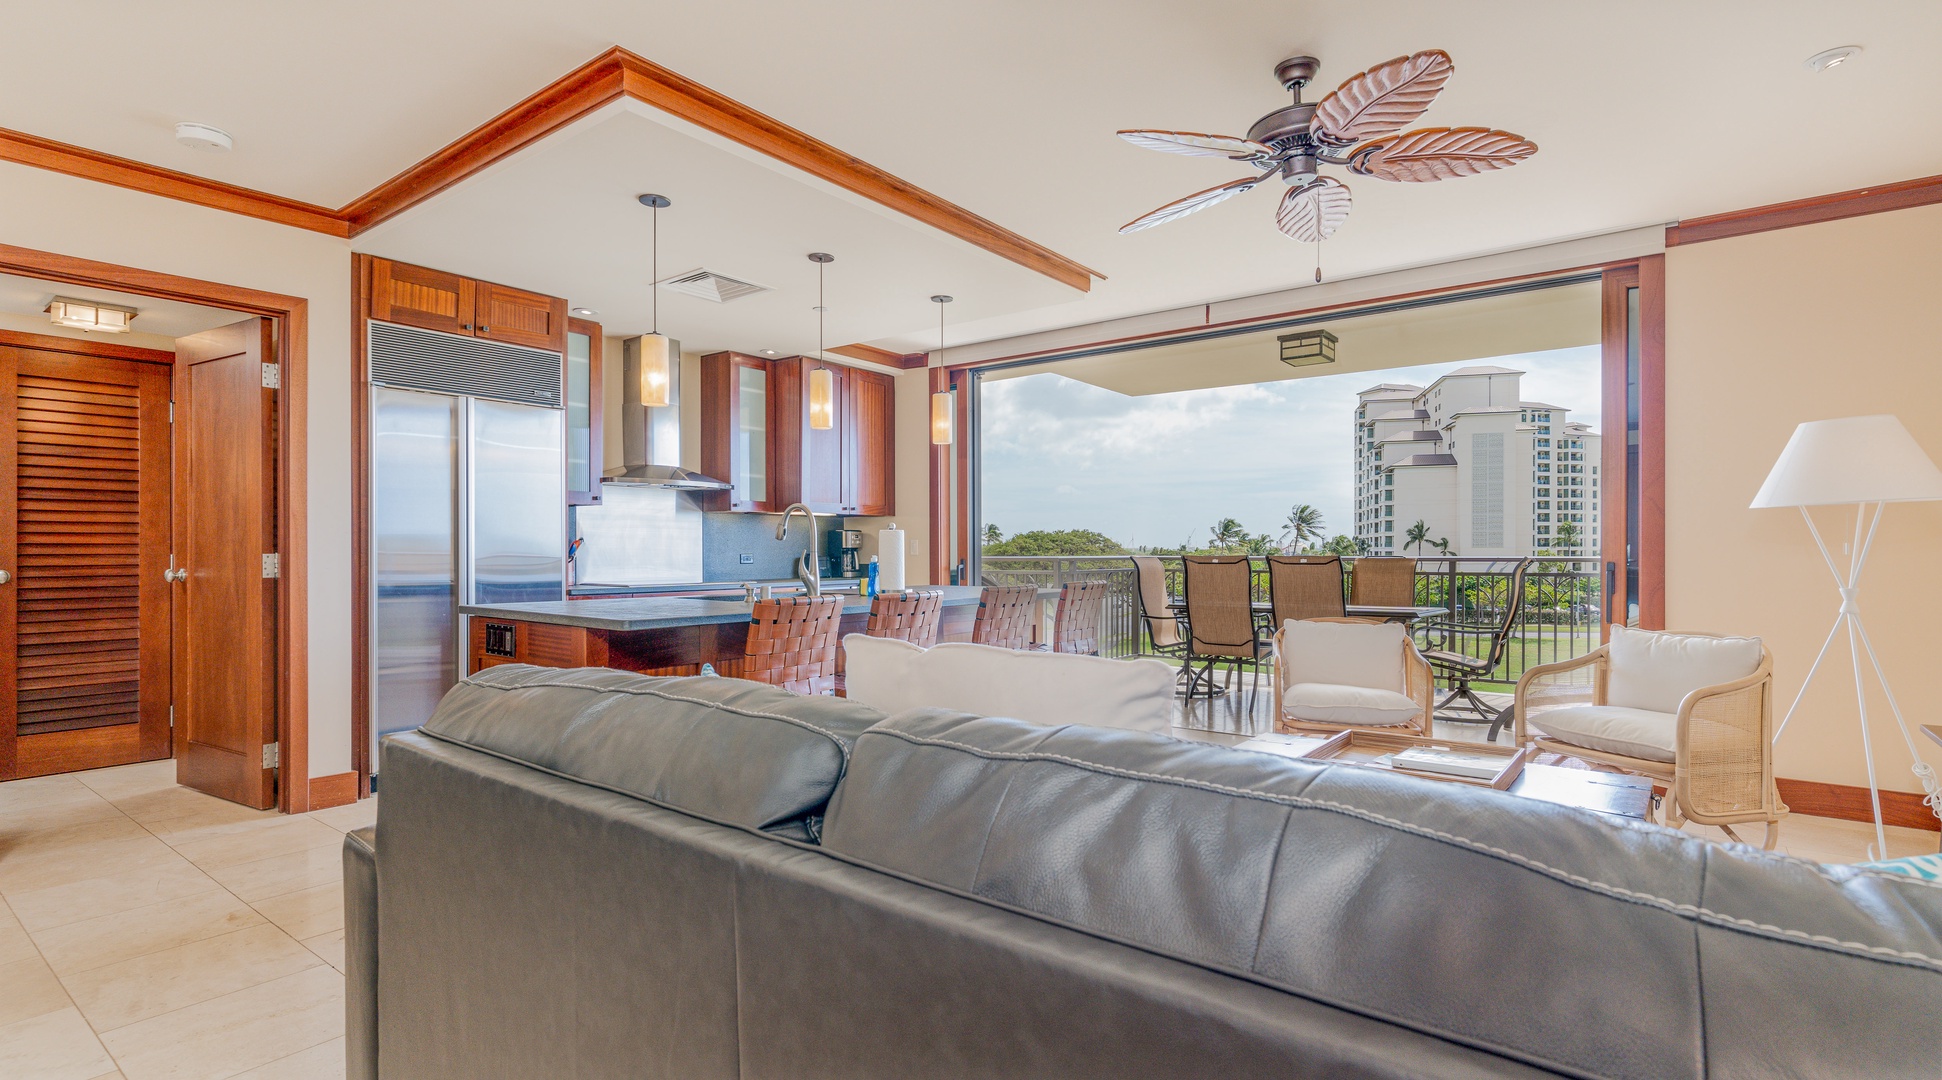 Kapolei Vacation Rentals, Ko Olina Beach Villas O425 - Welcome to your comfortable couch, twinkling pendant lights and an incredible view.